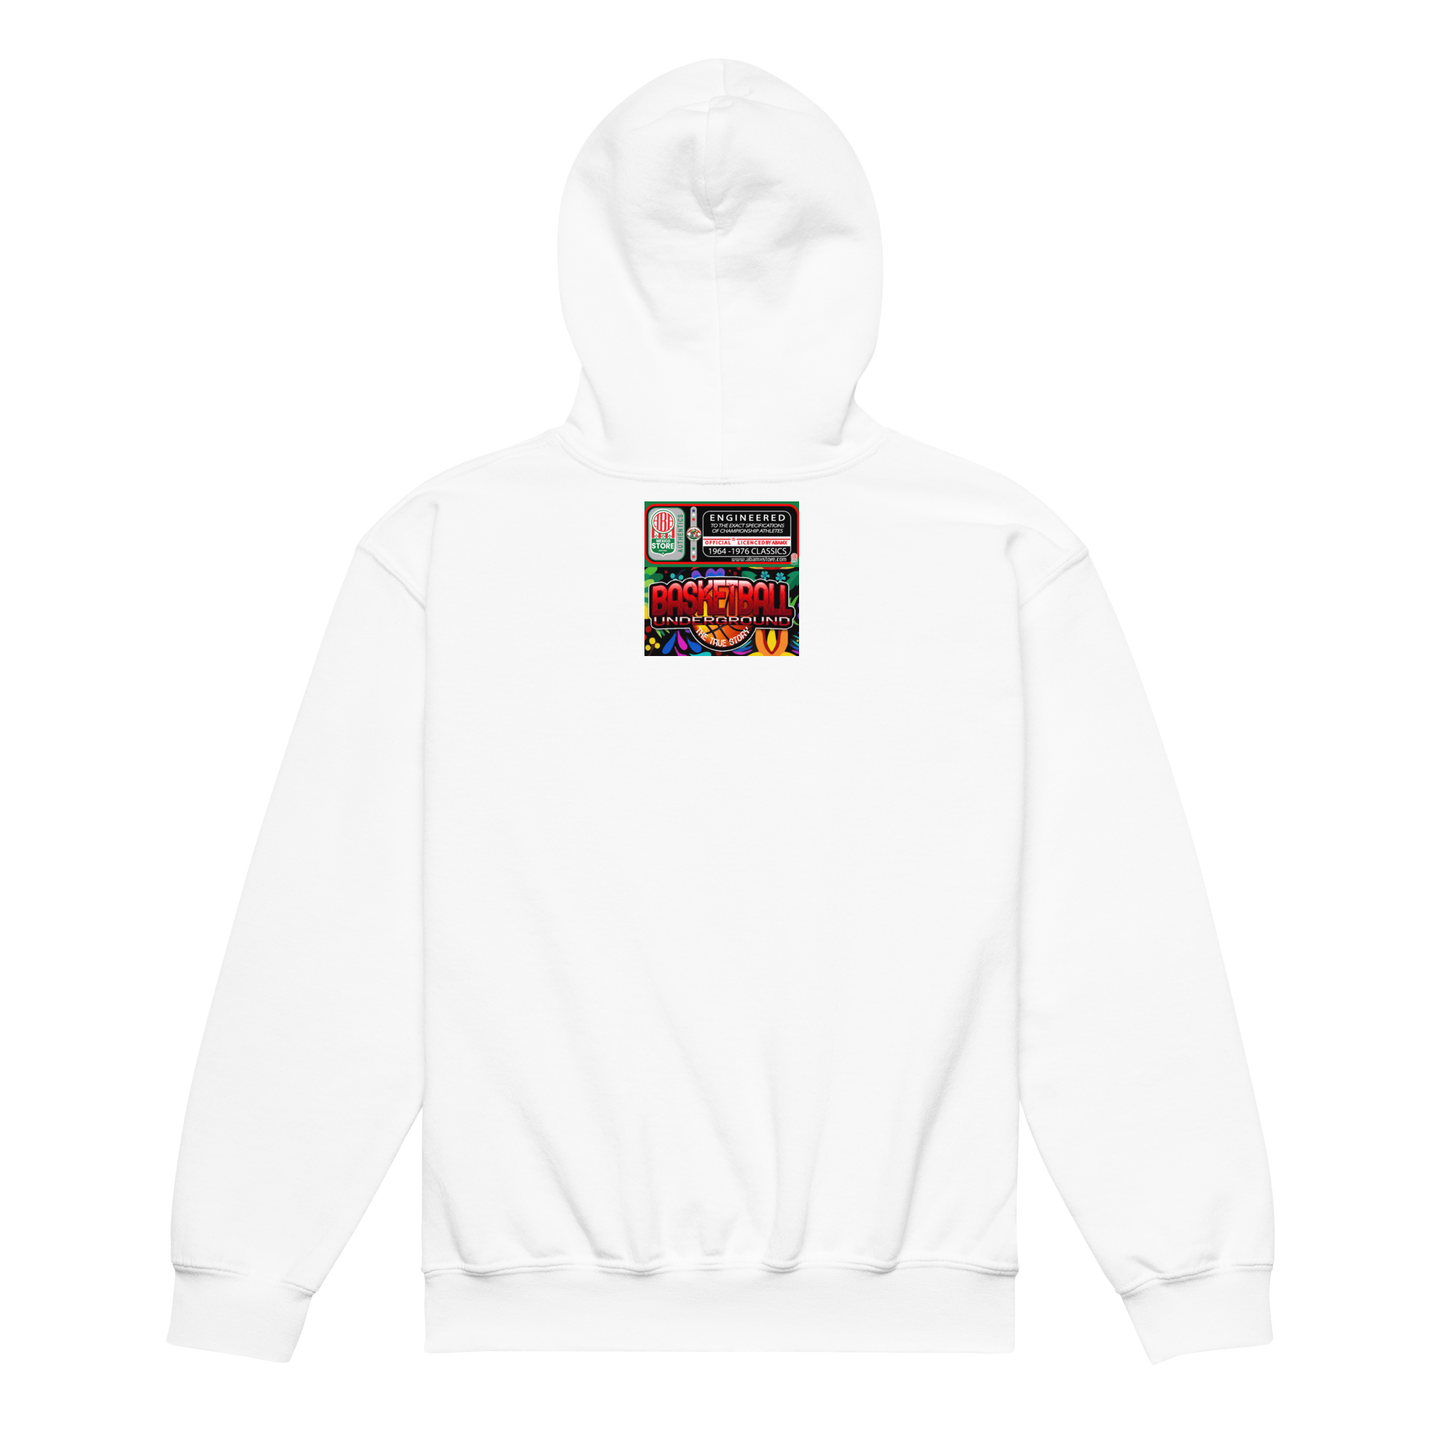 "Handles Over Excuses - The Embarrassment" hoodie